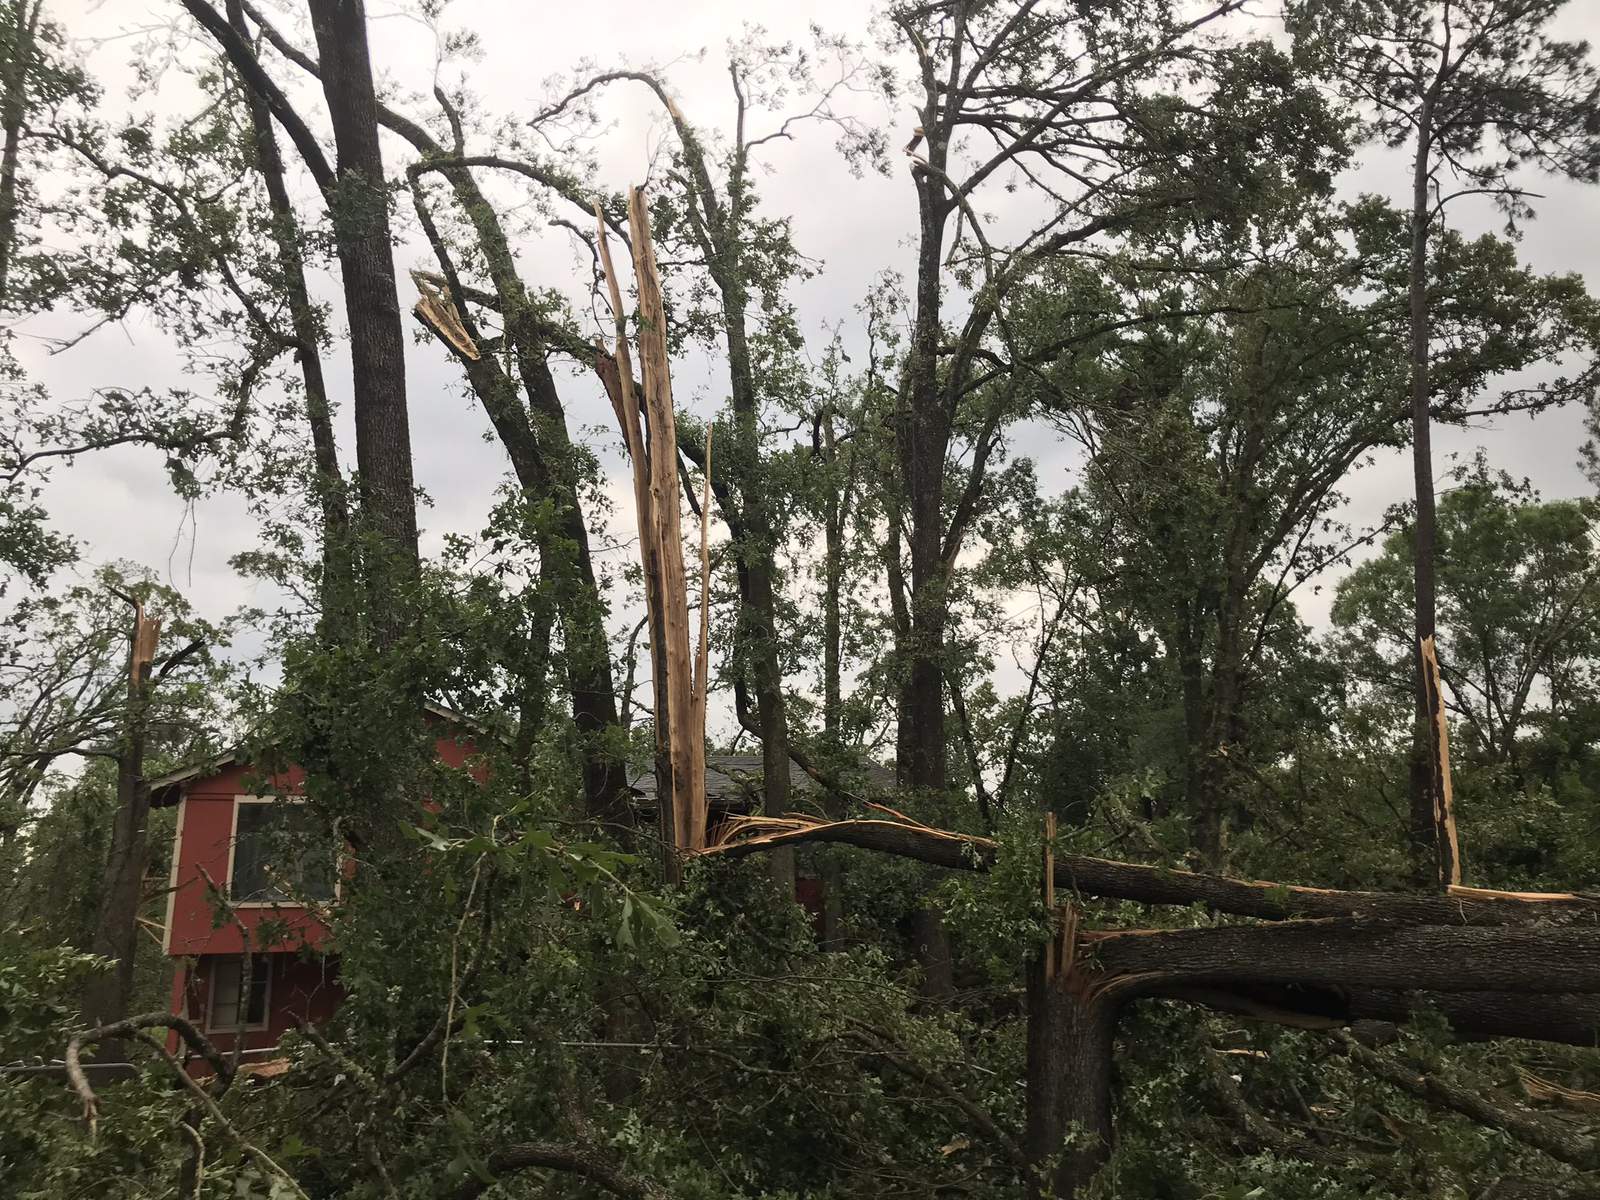 NWS: Deadly tornado in Onalaska peaked at 140 mph winds, caused EF3 damage in parts